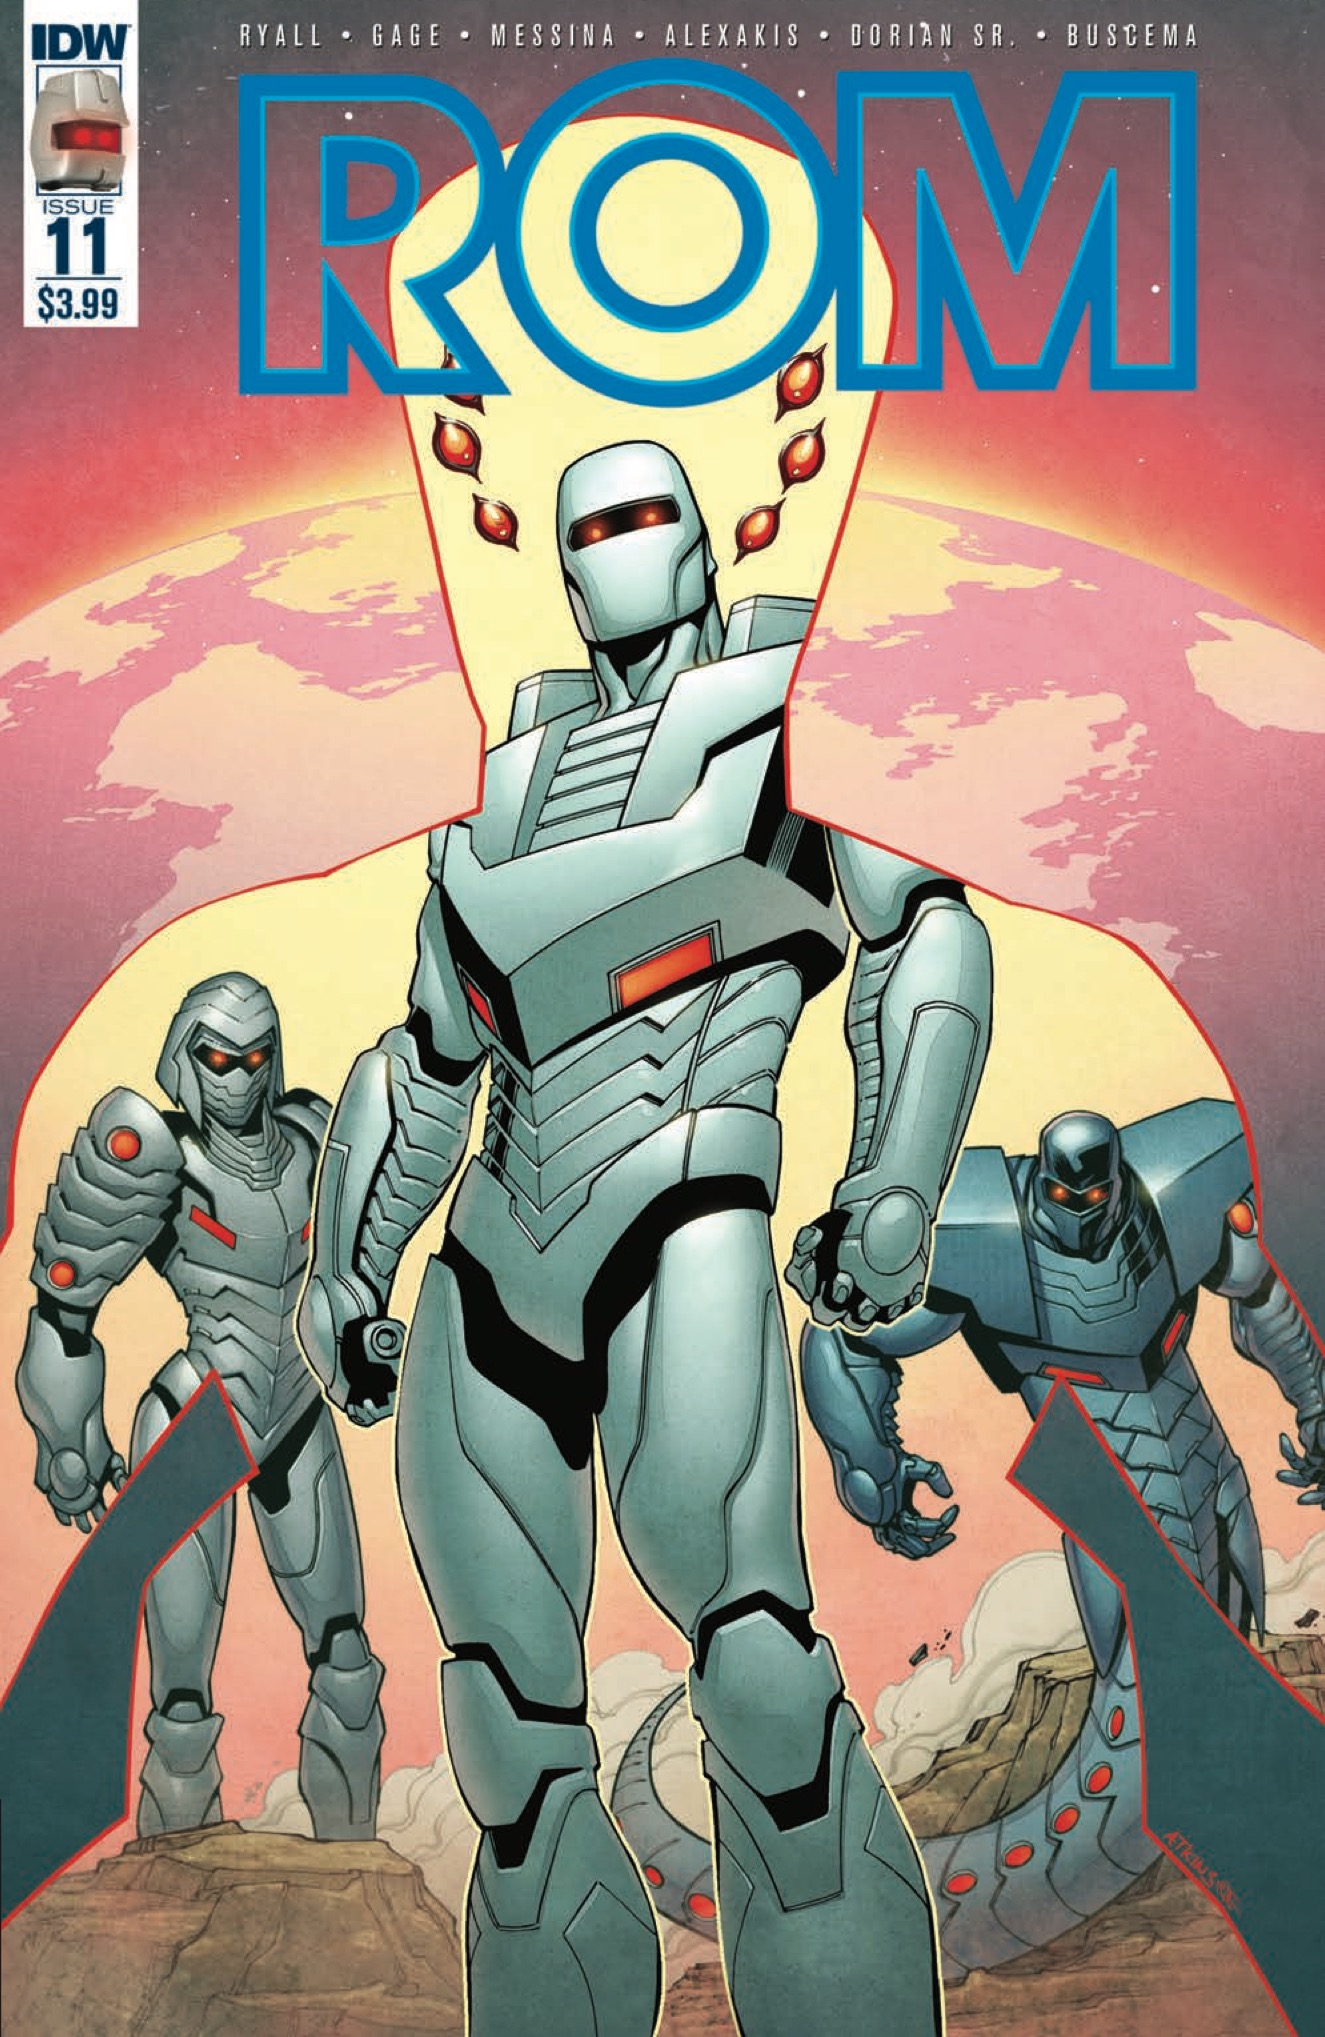 [EXCLUSIVE] IDW Preview: Rom #11